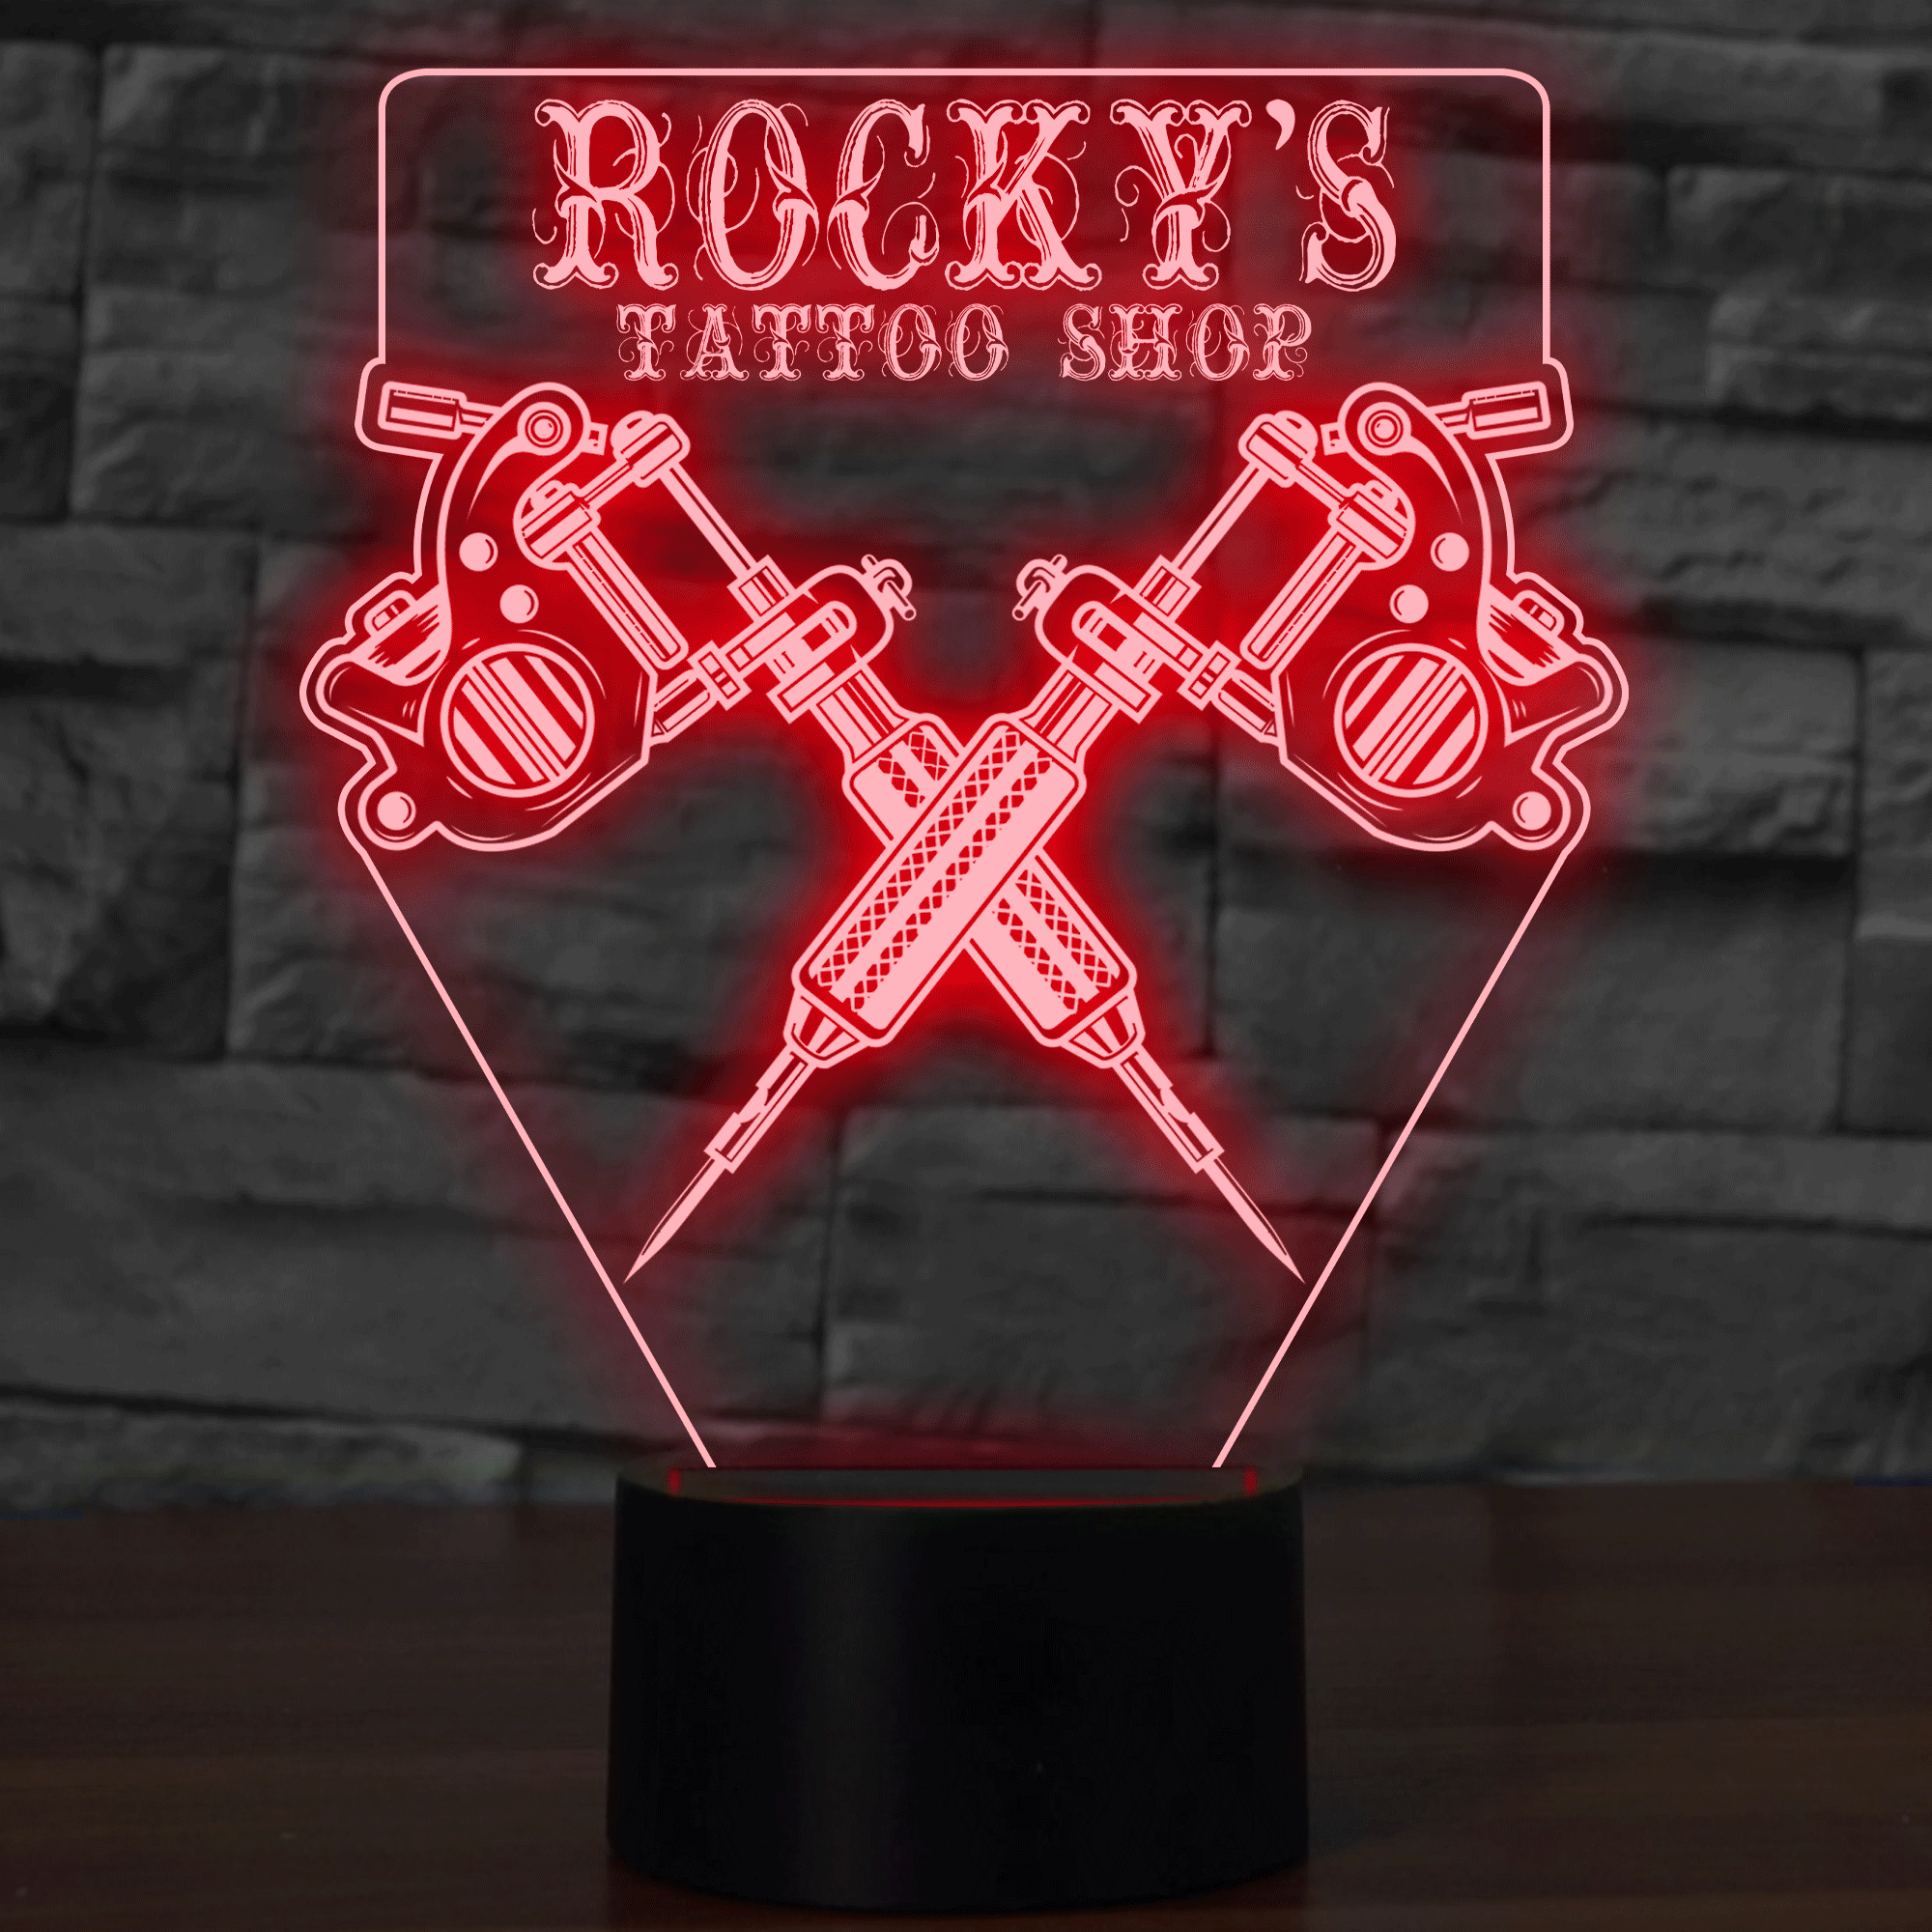 Personalized Name Tattoo Shop LED Night Light Lamp with Tattoo Artist Gift